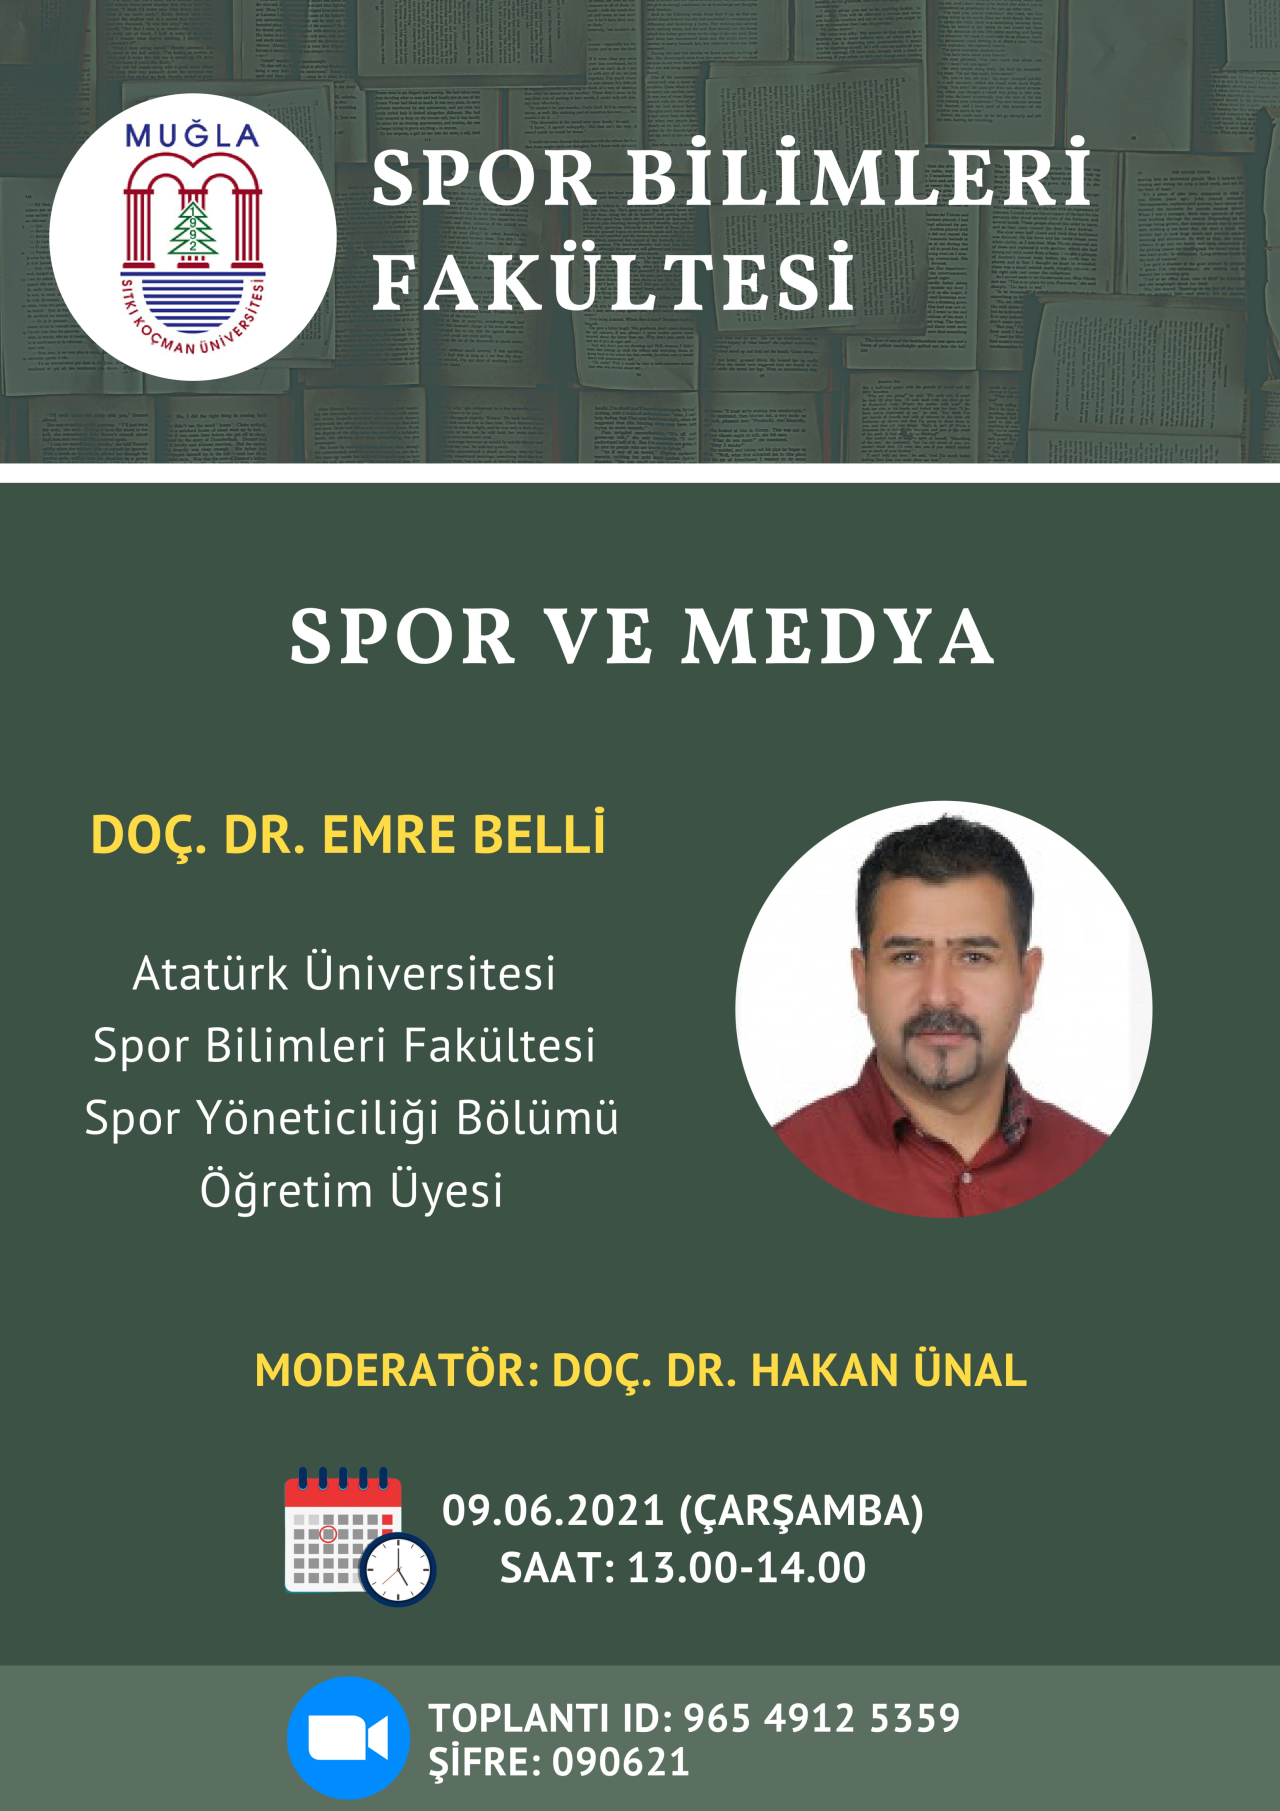 "Sports and Media" Event as part of the Career Days Event in our Department Assoc. Dr. It was held with the participation of Emre Belli